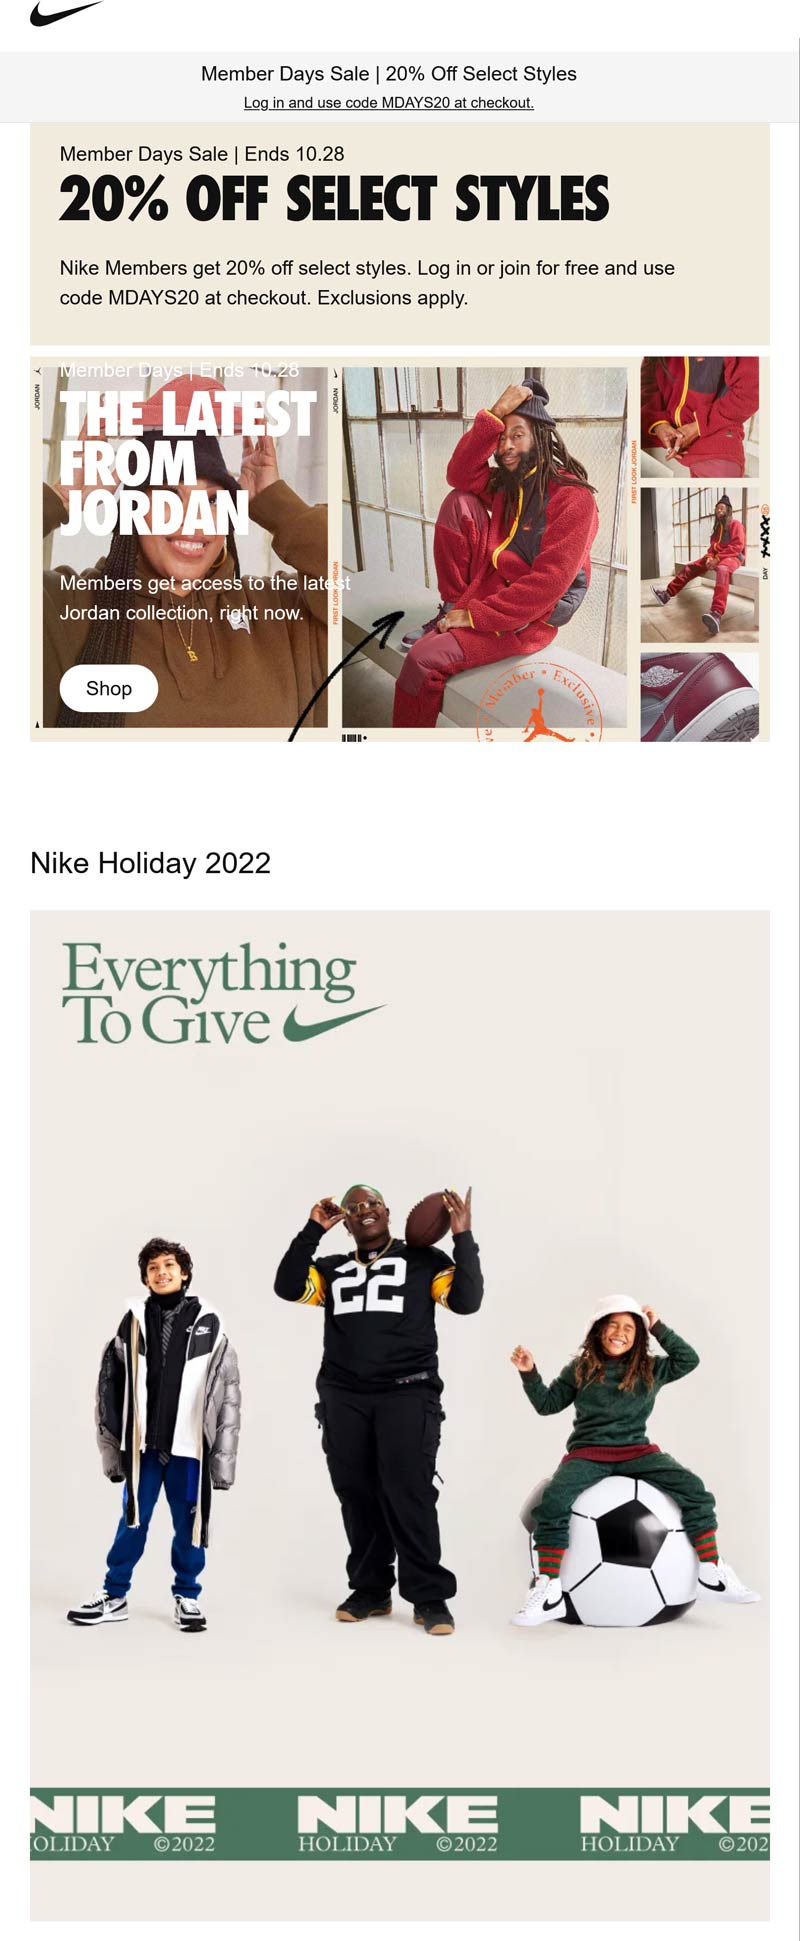 Nike stores Coupon  20% off various styles online today at Nike via promo code MDAYS20 #nike 